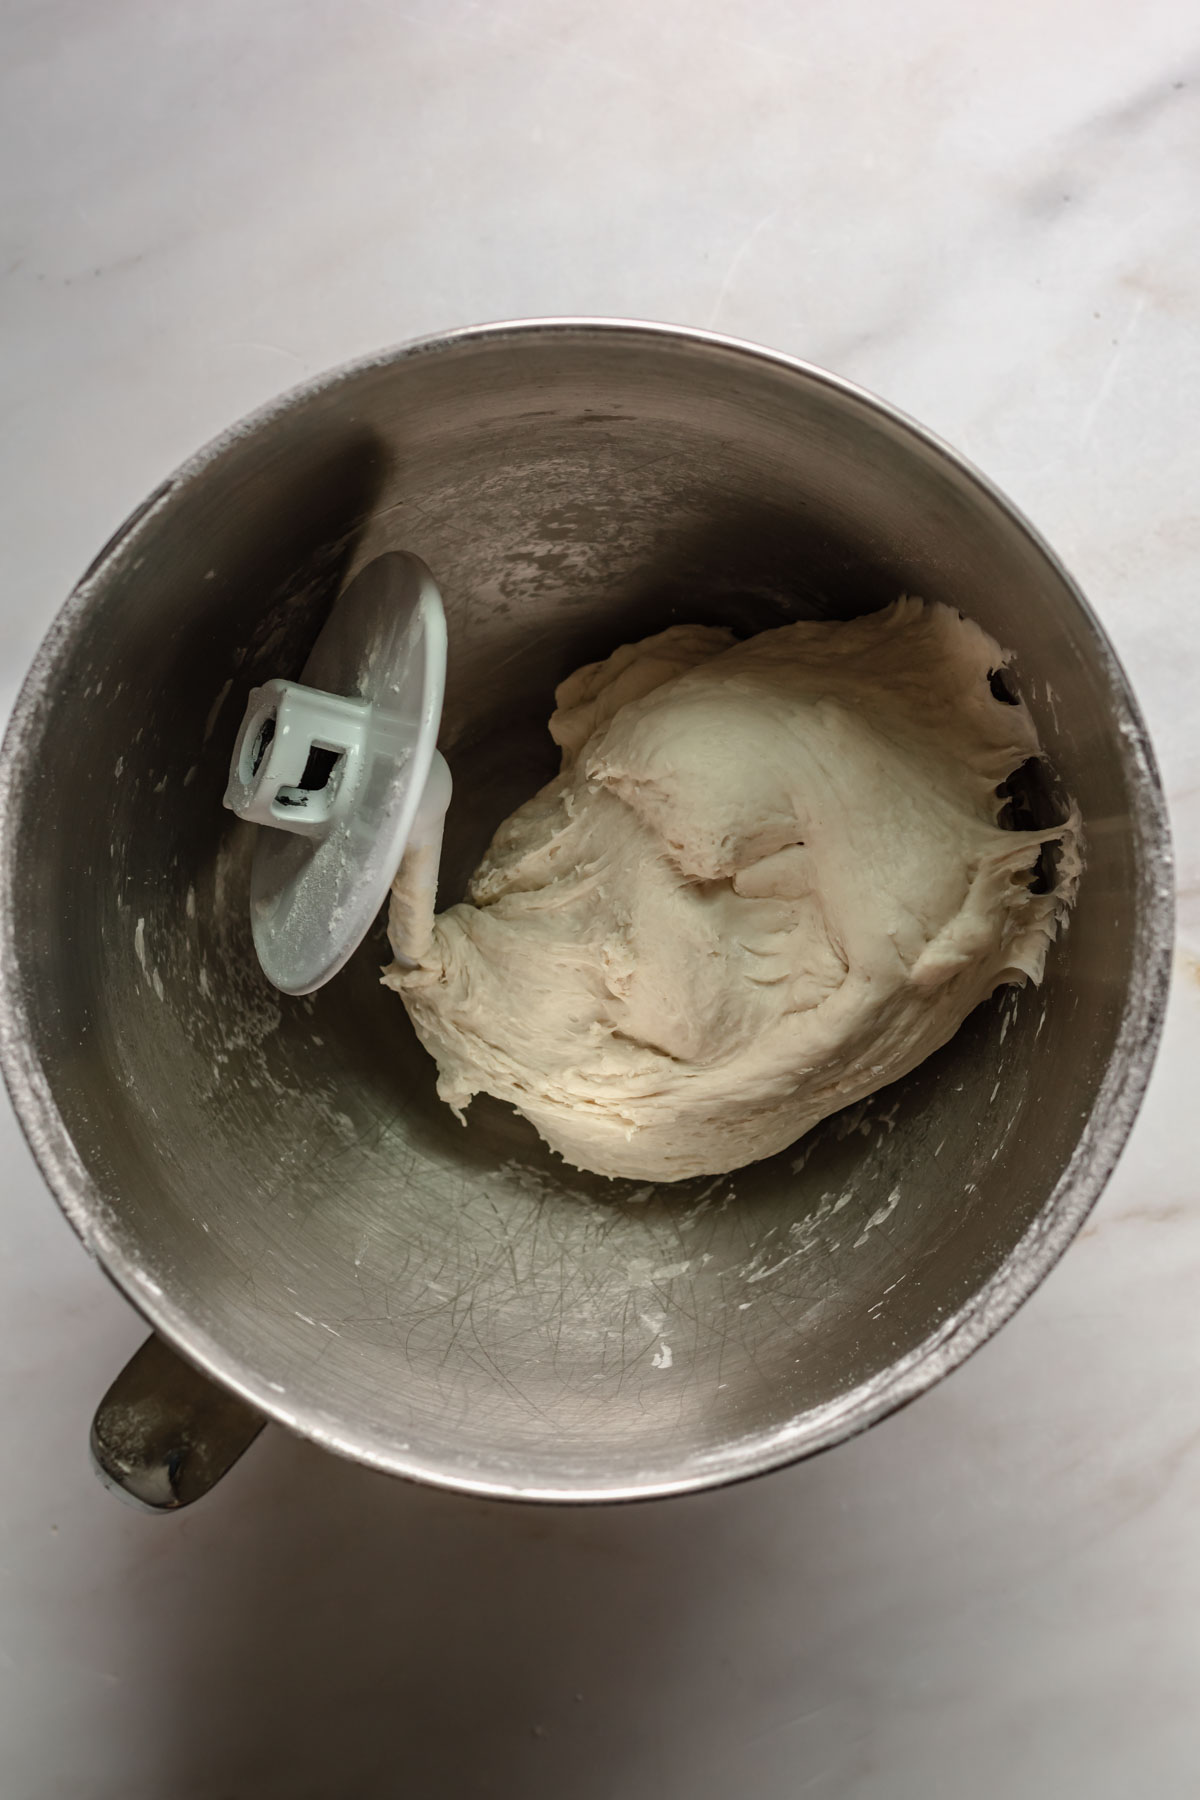 Dough in a bowl with the dough hook.